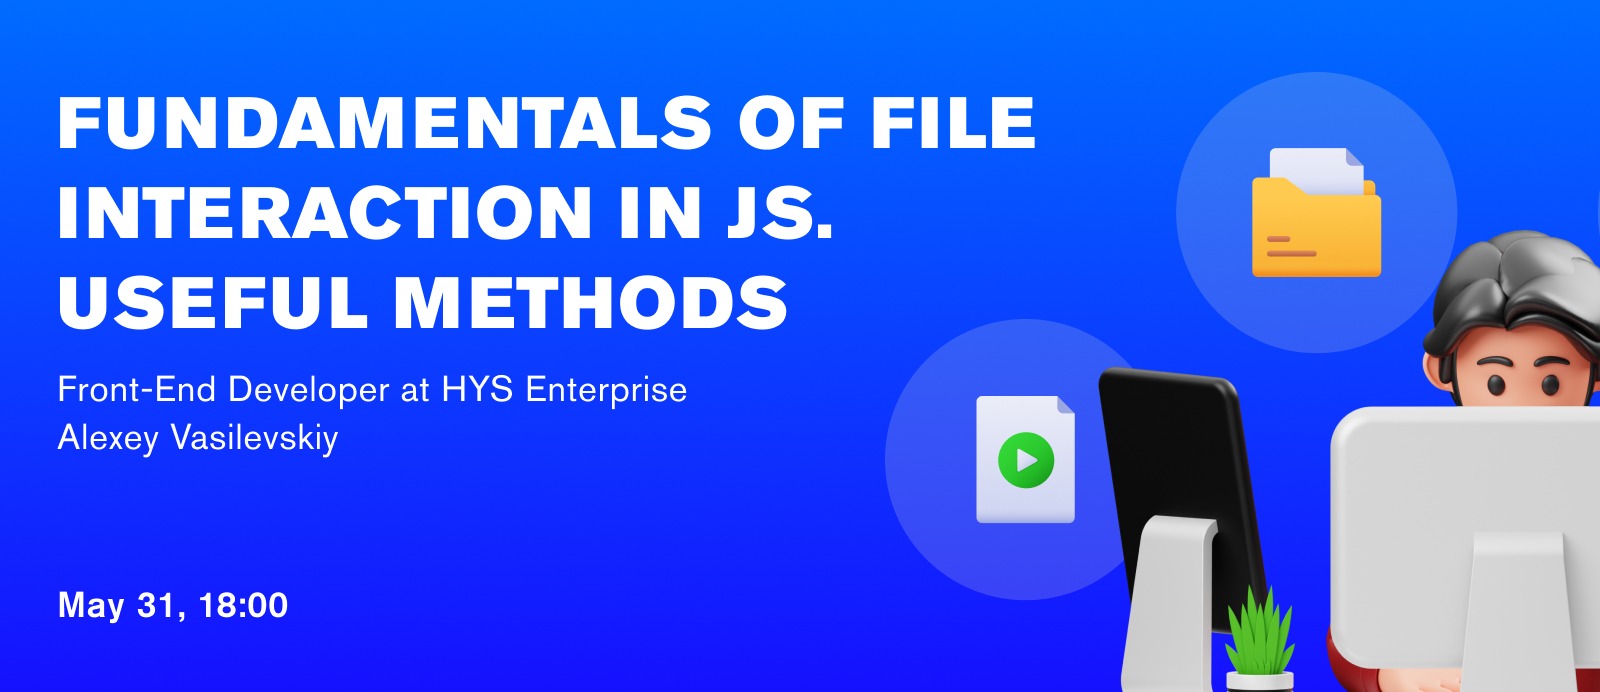 Fundamentals of File Interaction in JS. Useful Methods